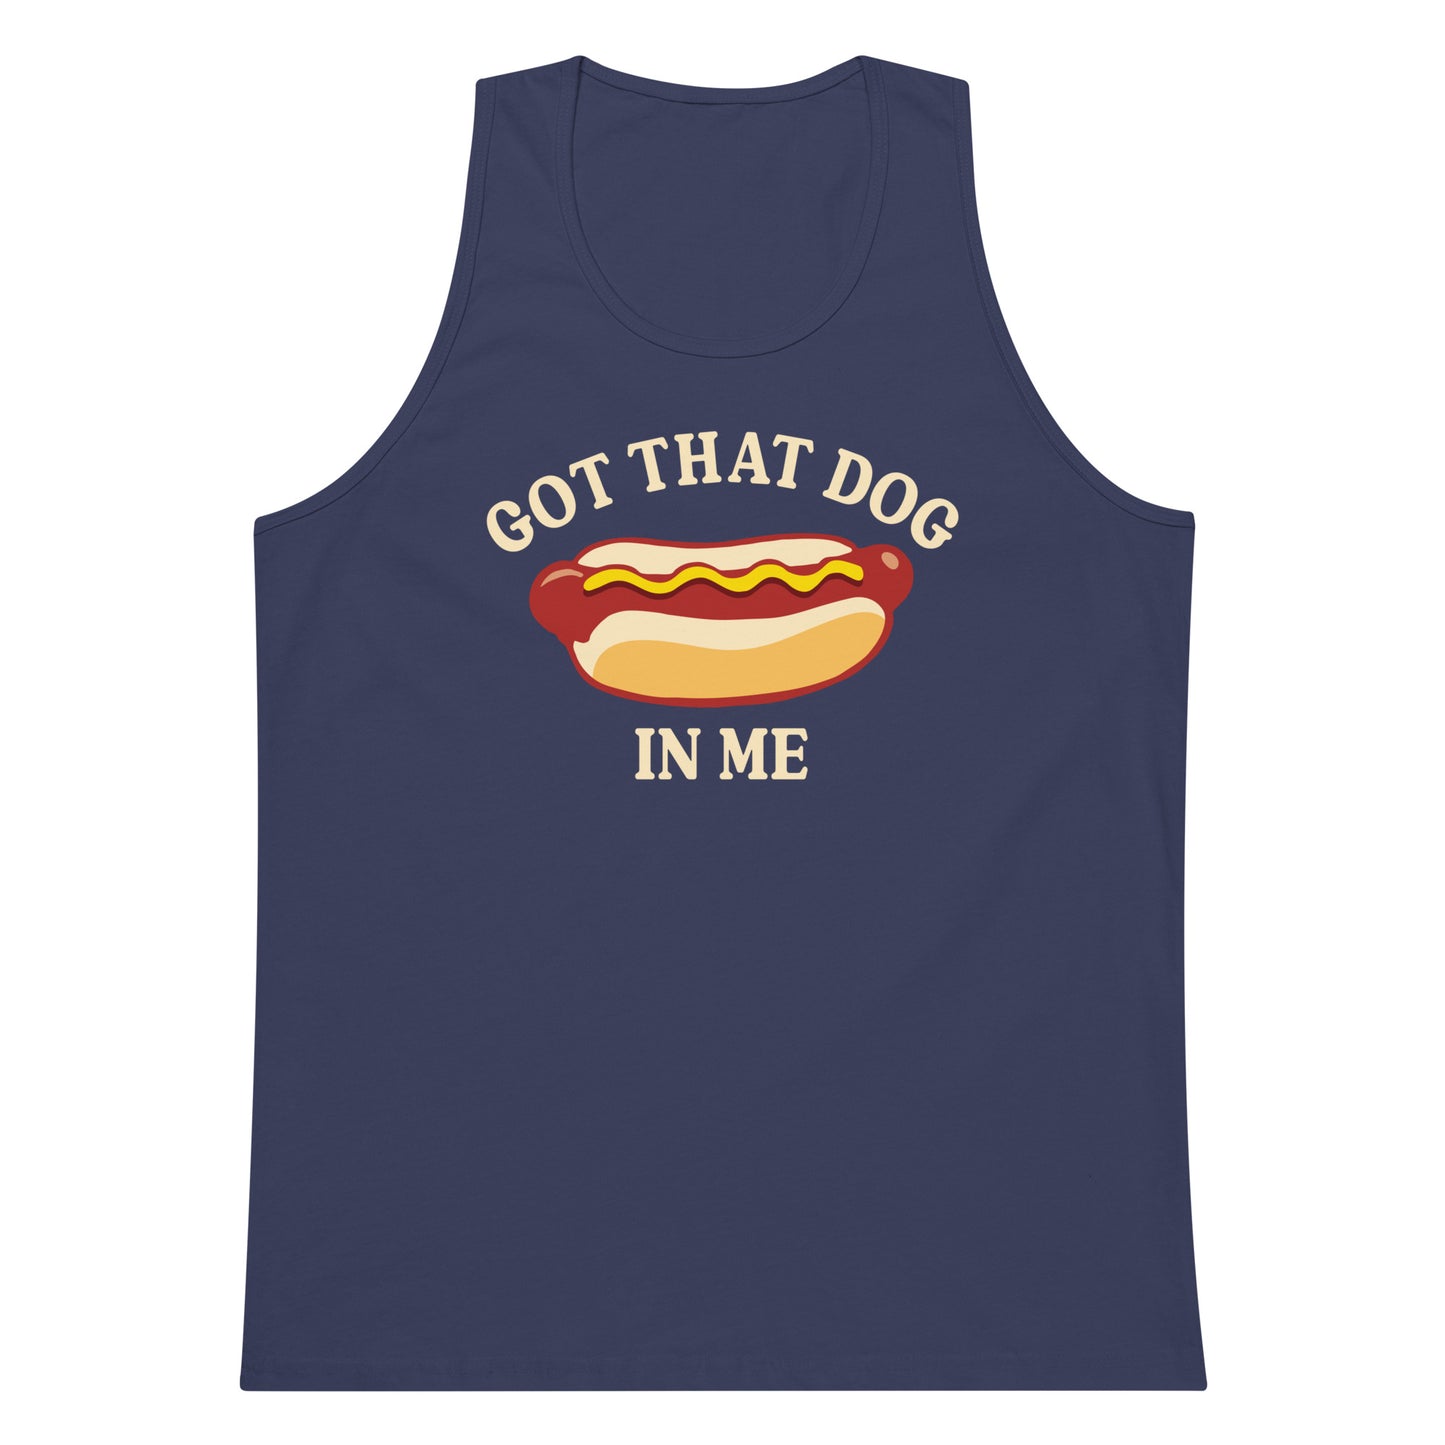 Got That Dog in Me (Hot Dog) tank top